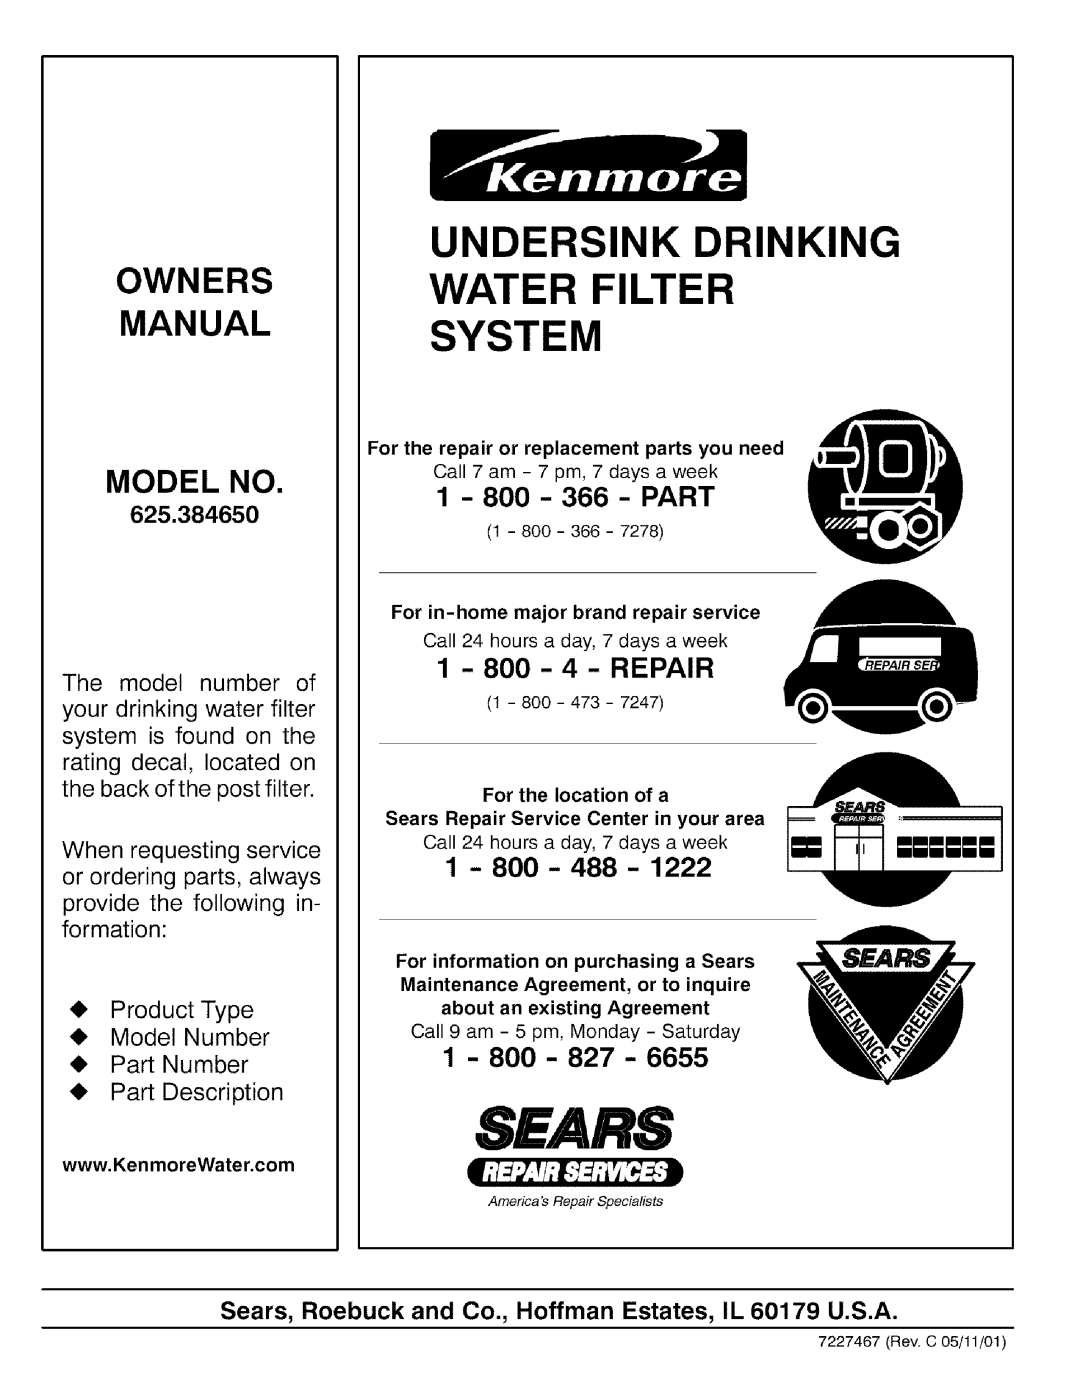 Kenmore 625.384650 Undersink Drinking Water Filter System, Owners Manual, I t v/l. .J-t i ,l, The model number of, Sears 